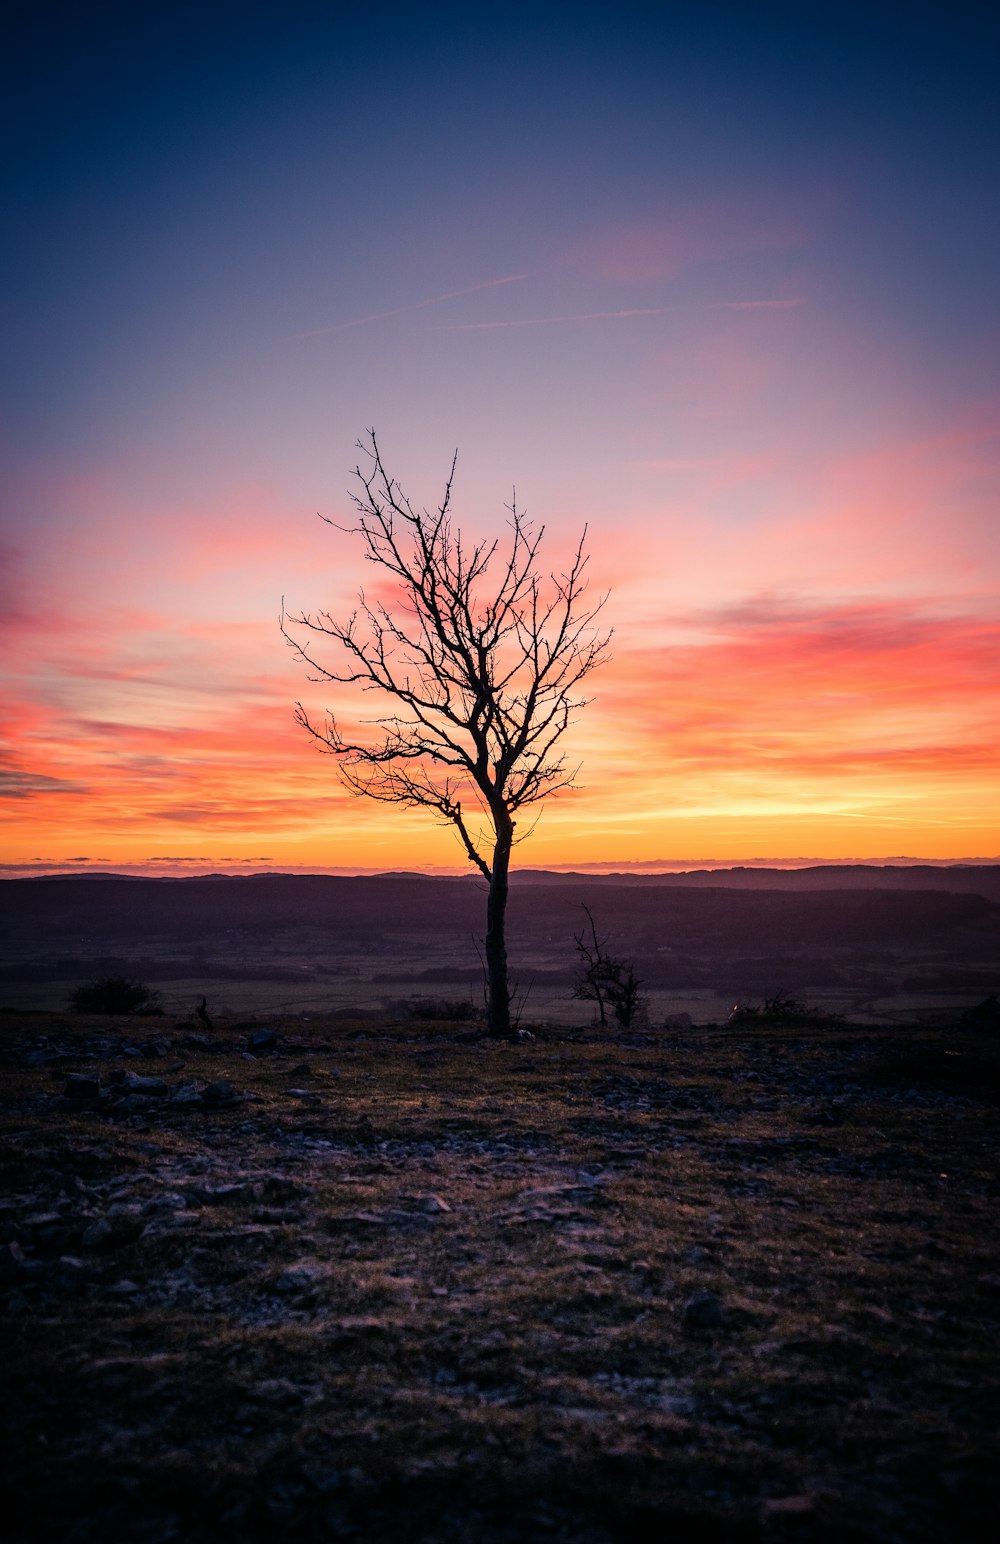 a lone tree is silhouetted against a colorful sunset